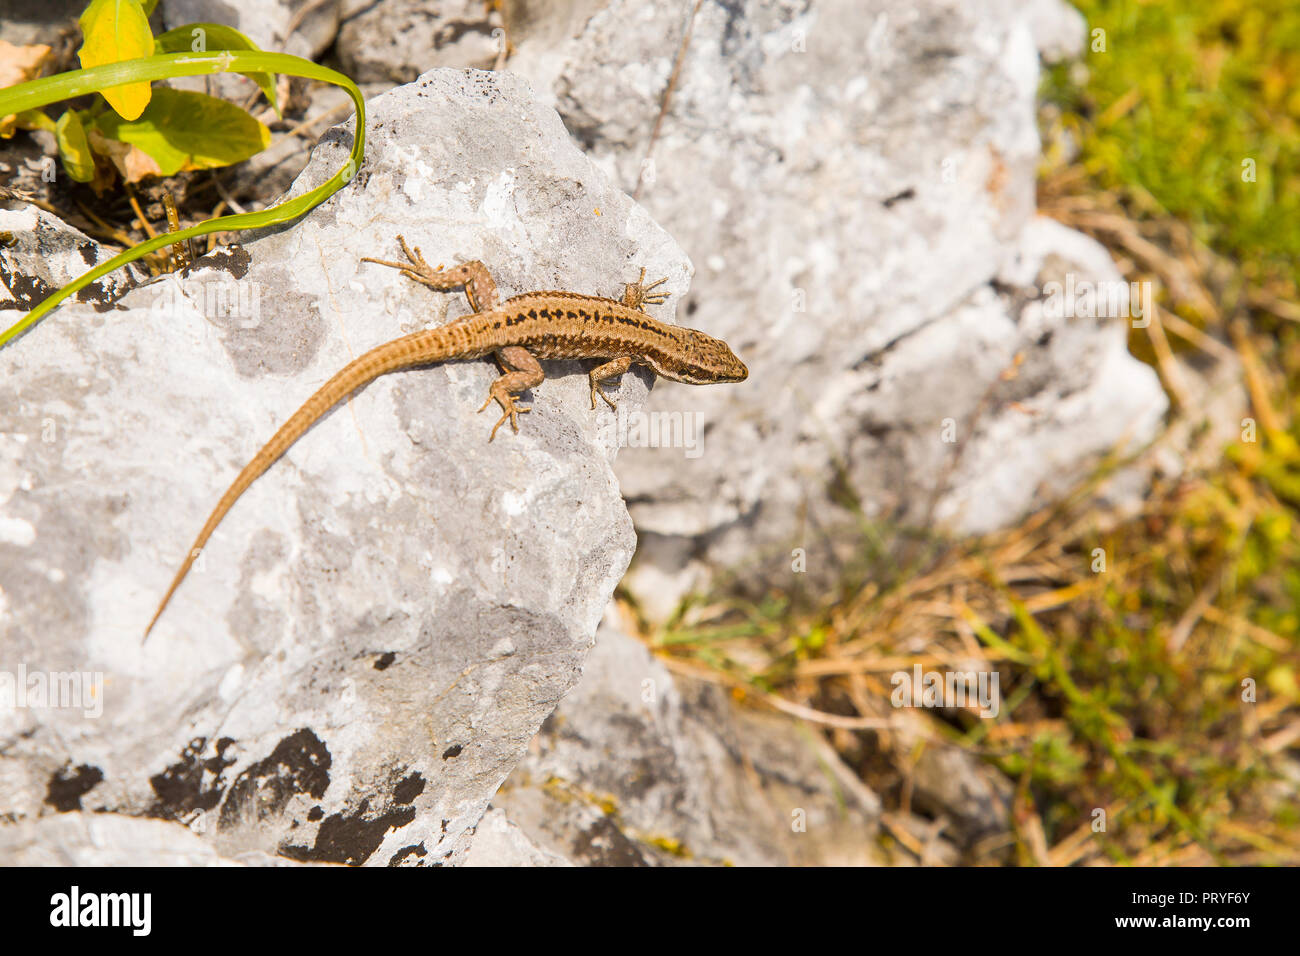 Lizard in the mountains Stock Photo